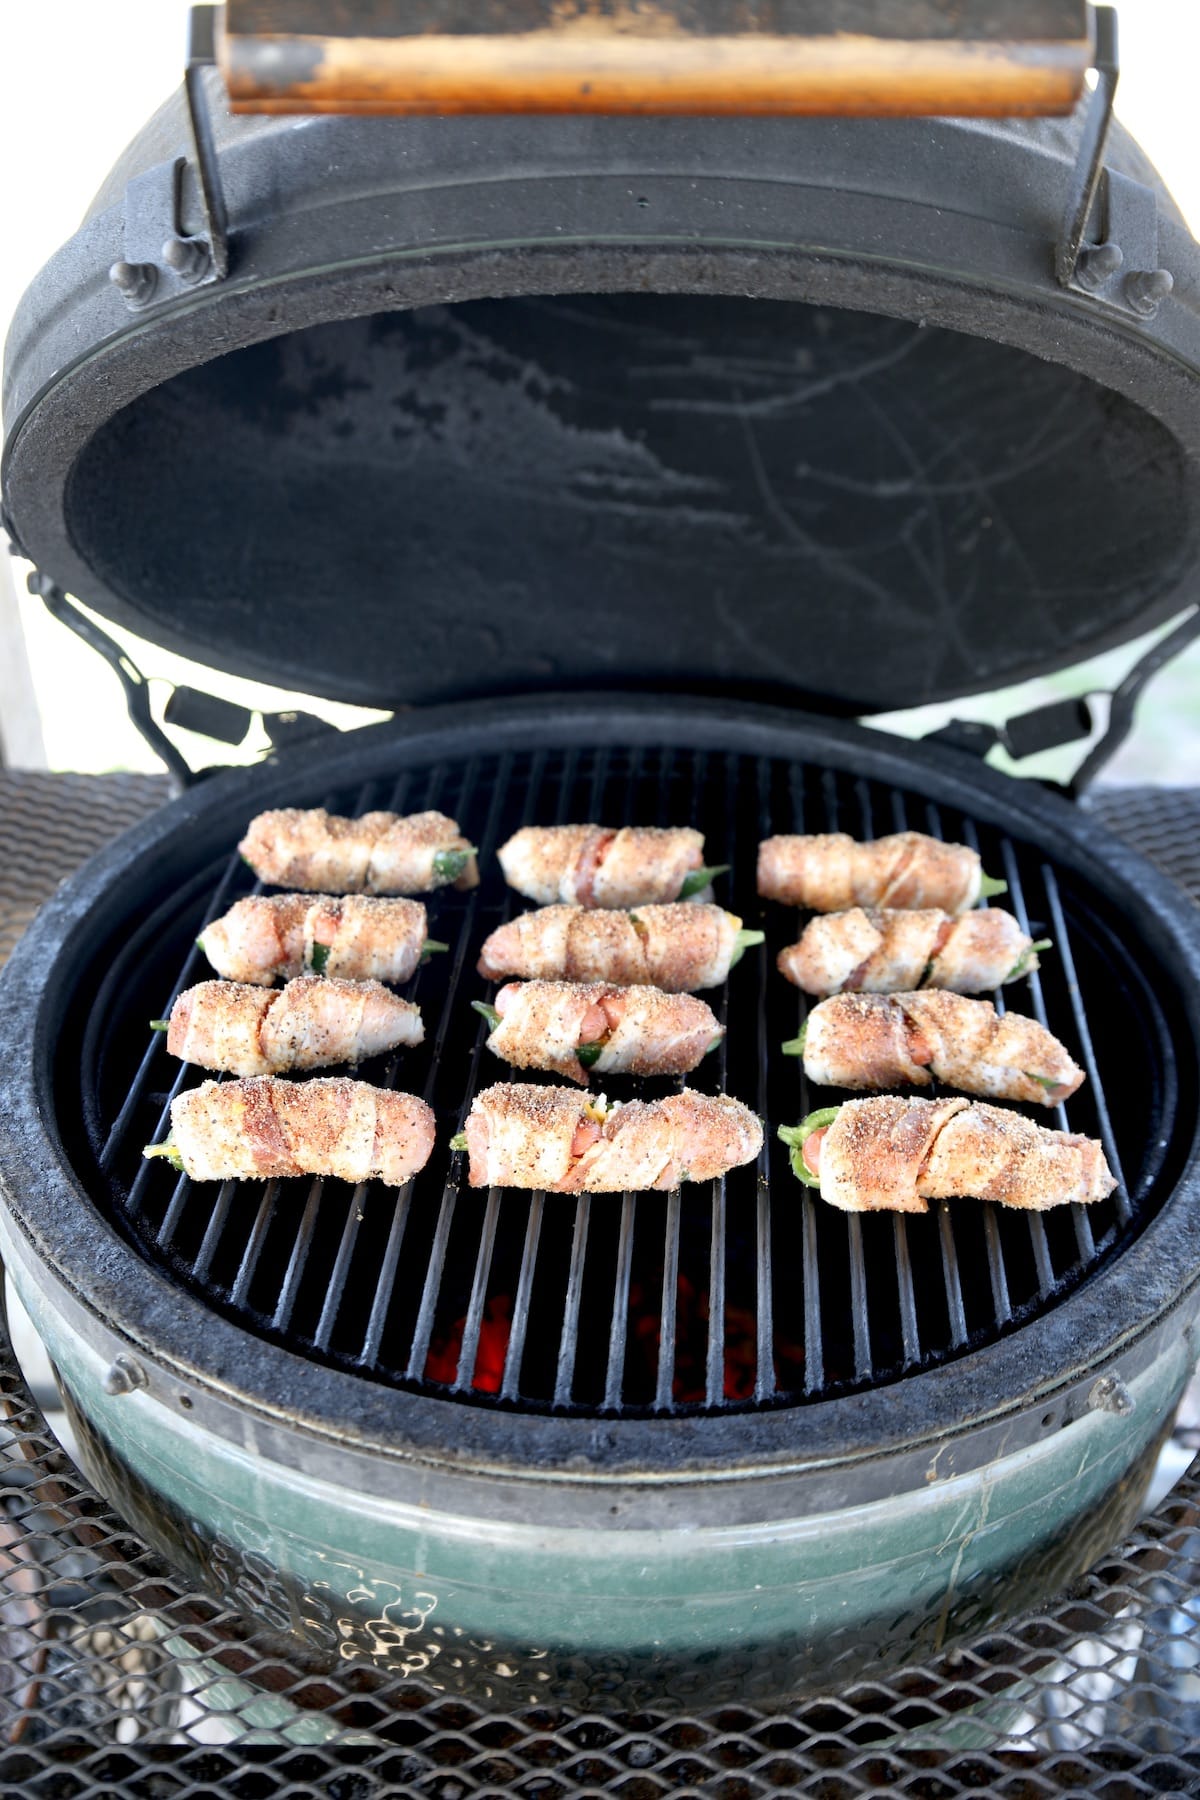 Grilling bacon wrapped poppers.